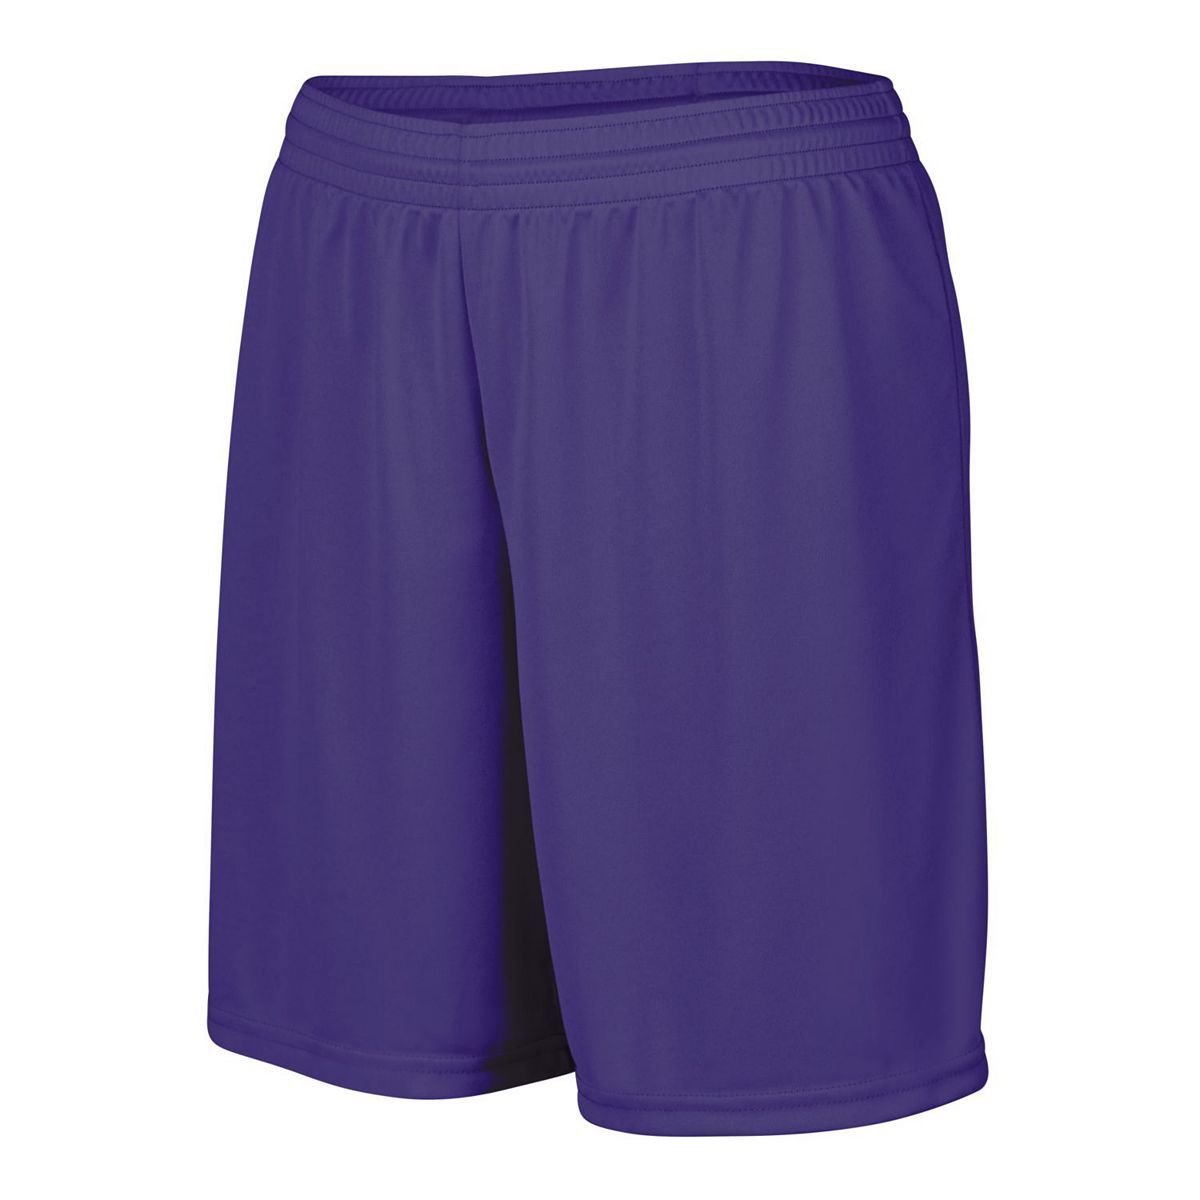 Augusta Sportswear Girls Octane Shorts in Purple  -Part of the Girls, Augusta-Products, Girls-Shorts product lines at KanaleyCreations.com